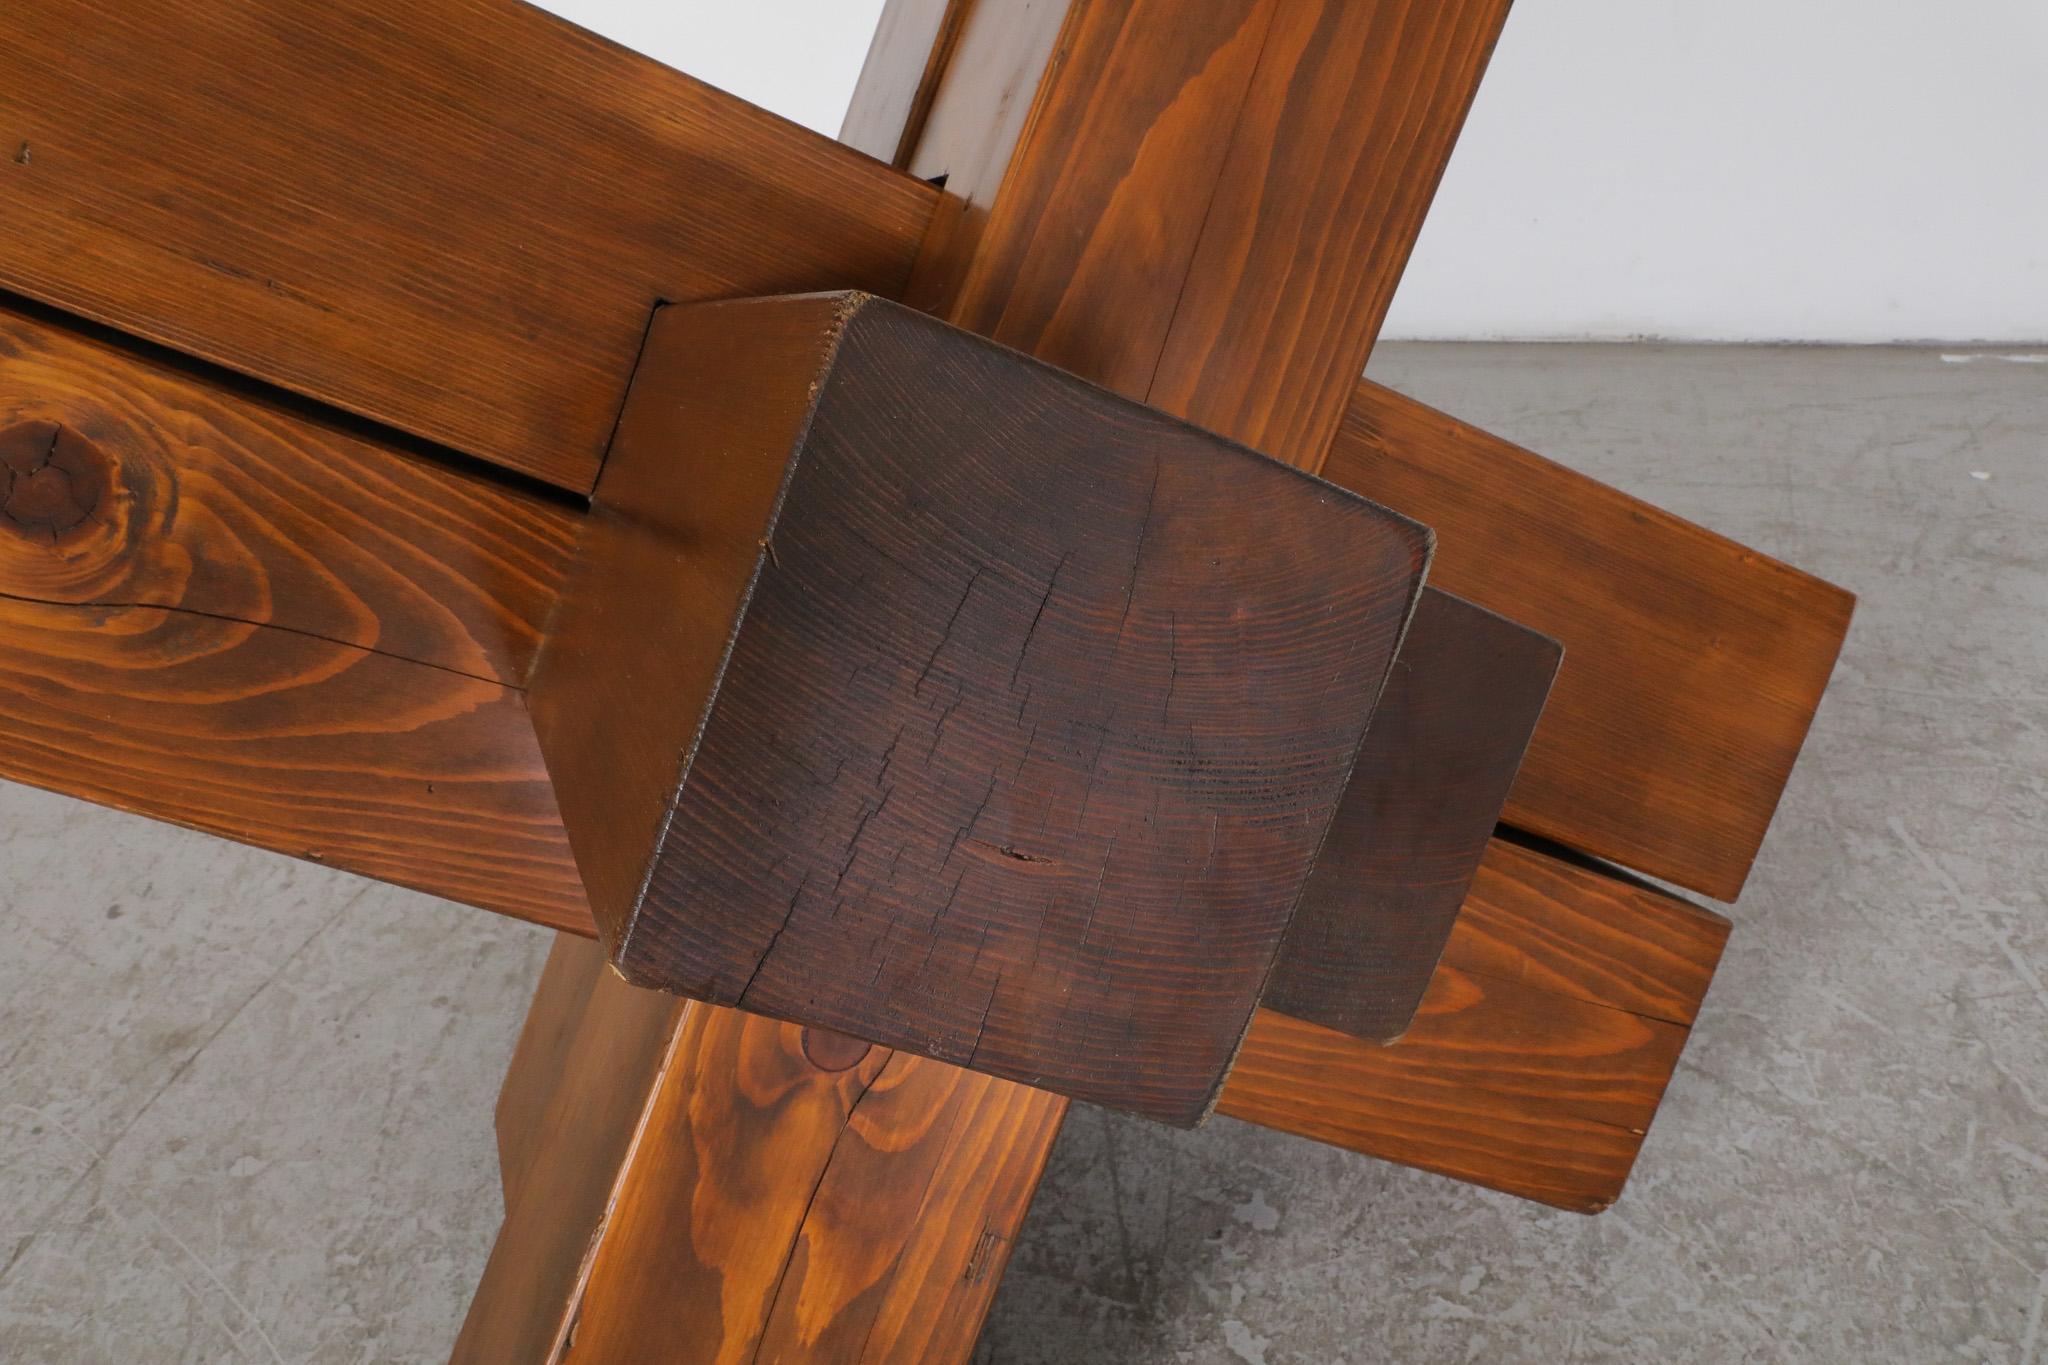 Large Walnut Abstract Cubist Sculpture, France, 1960's For Sale 7